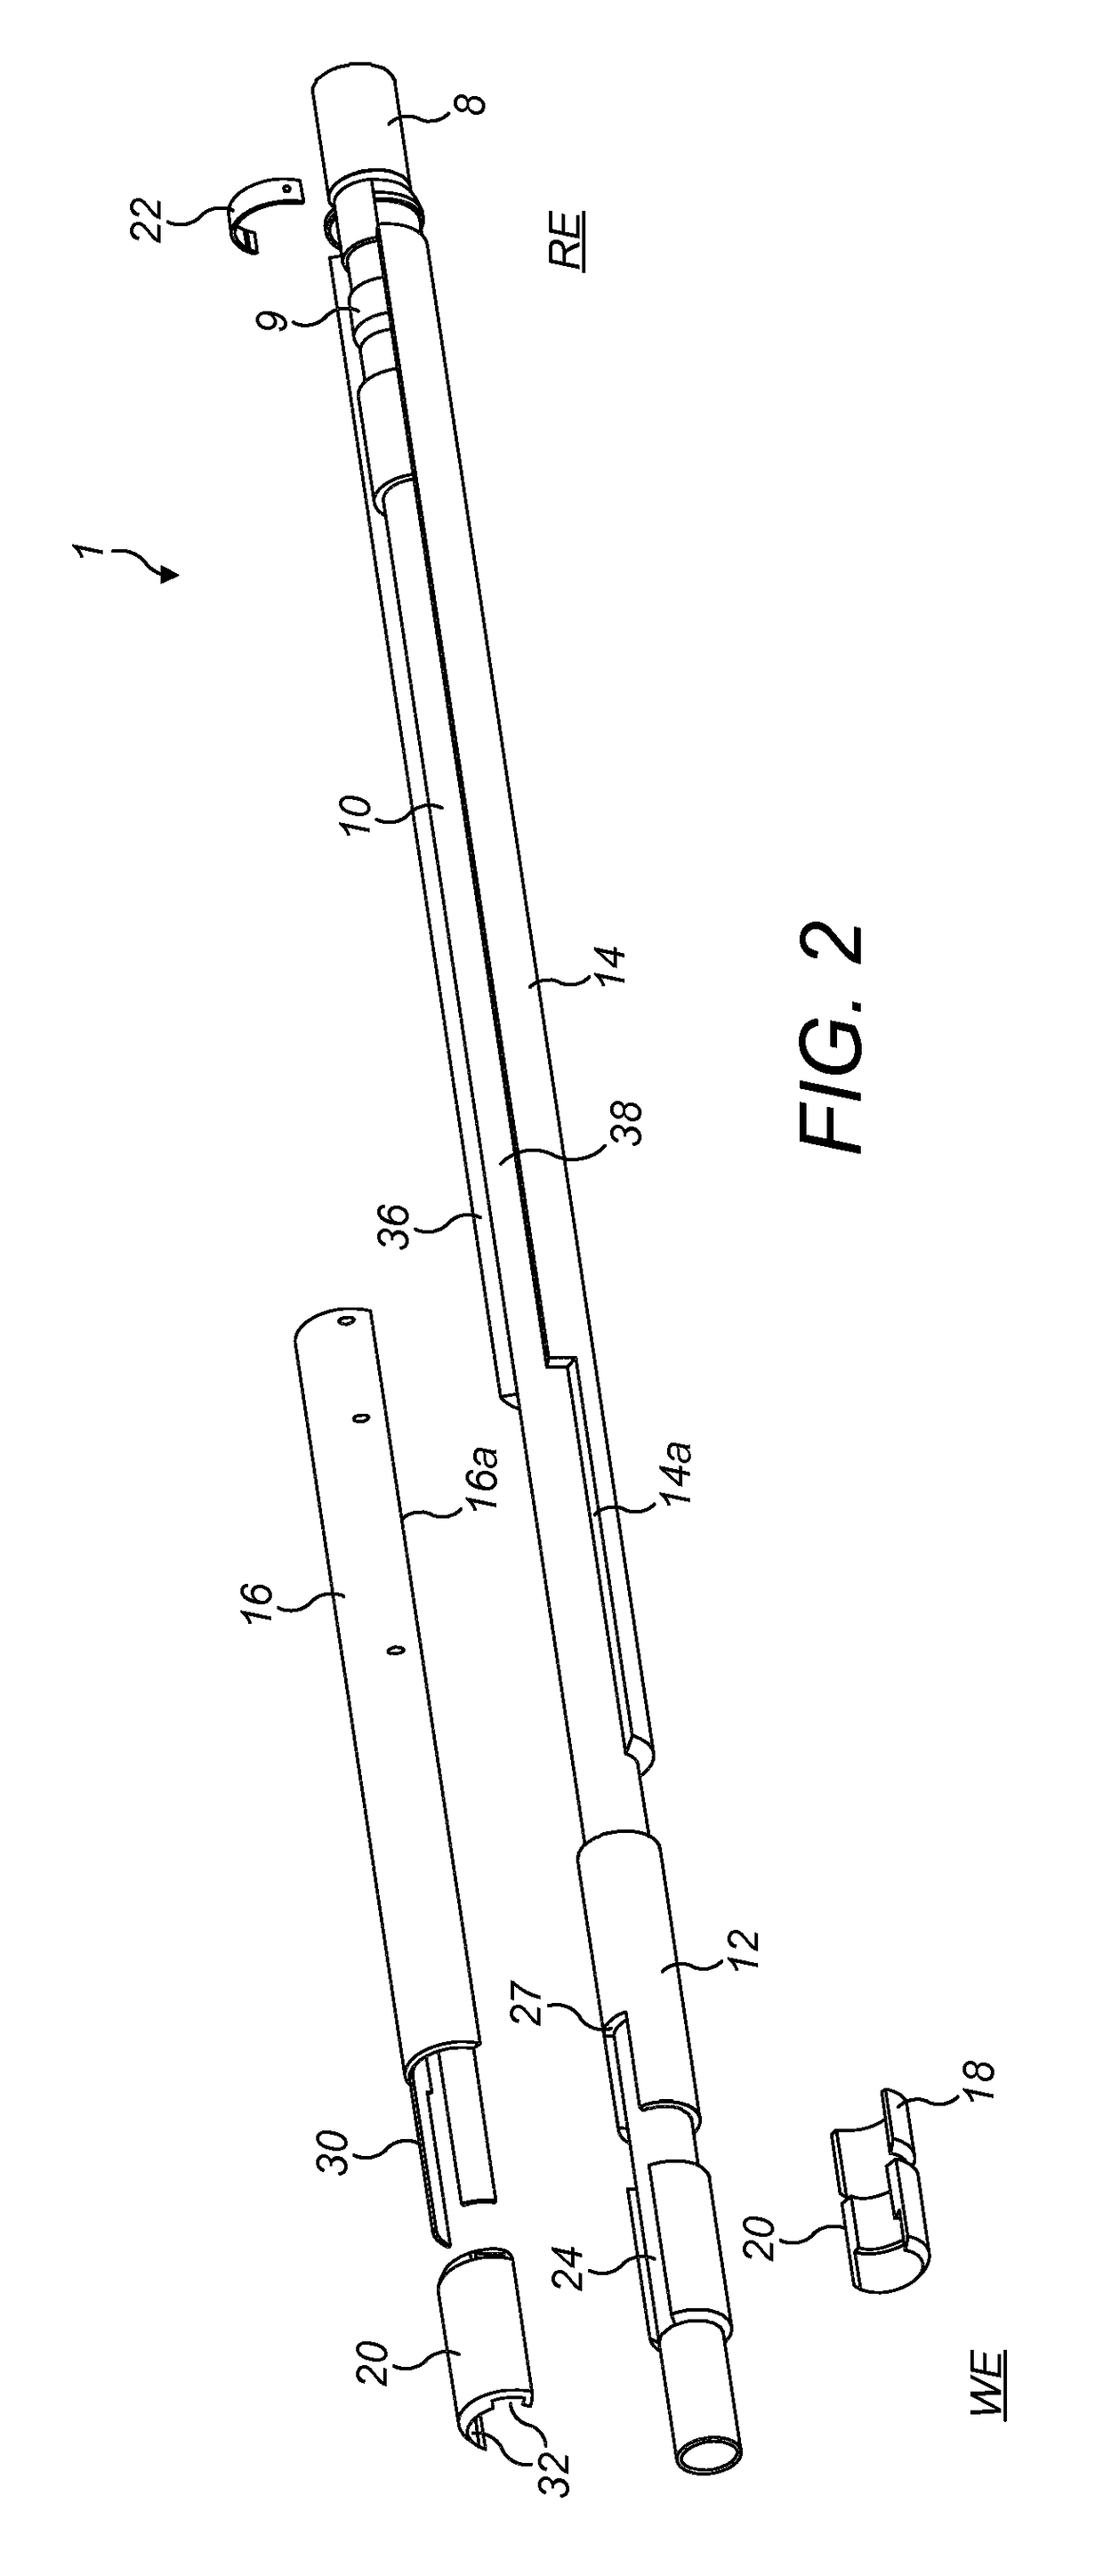 Downhole umbilical release assembly